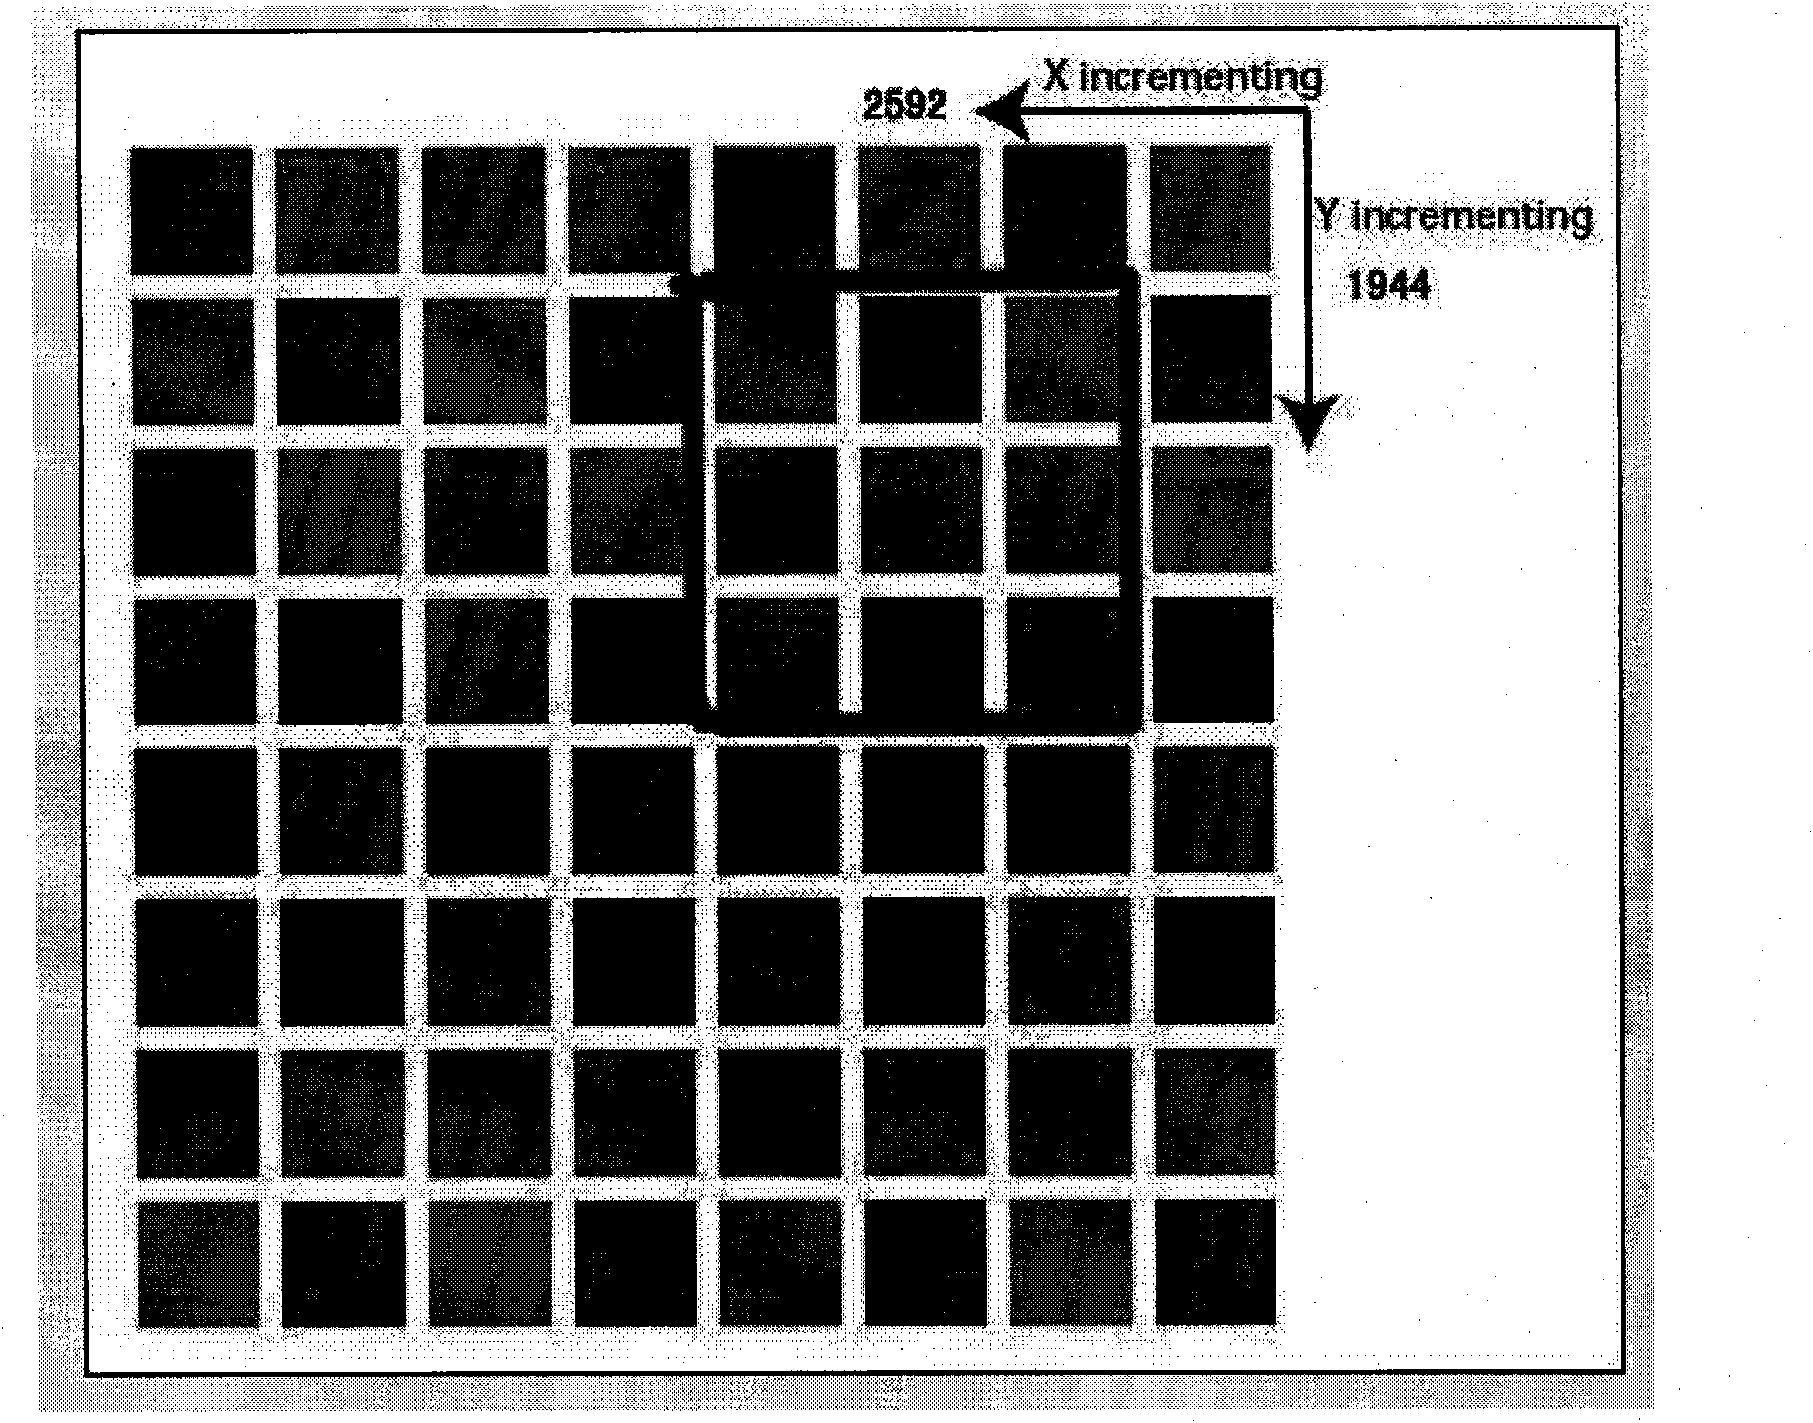 Image matrixing pretreatment method based on FPGA in high-resolution imaging system